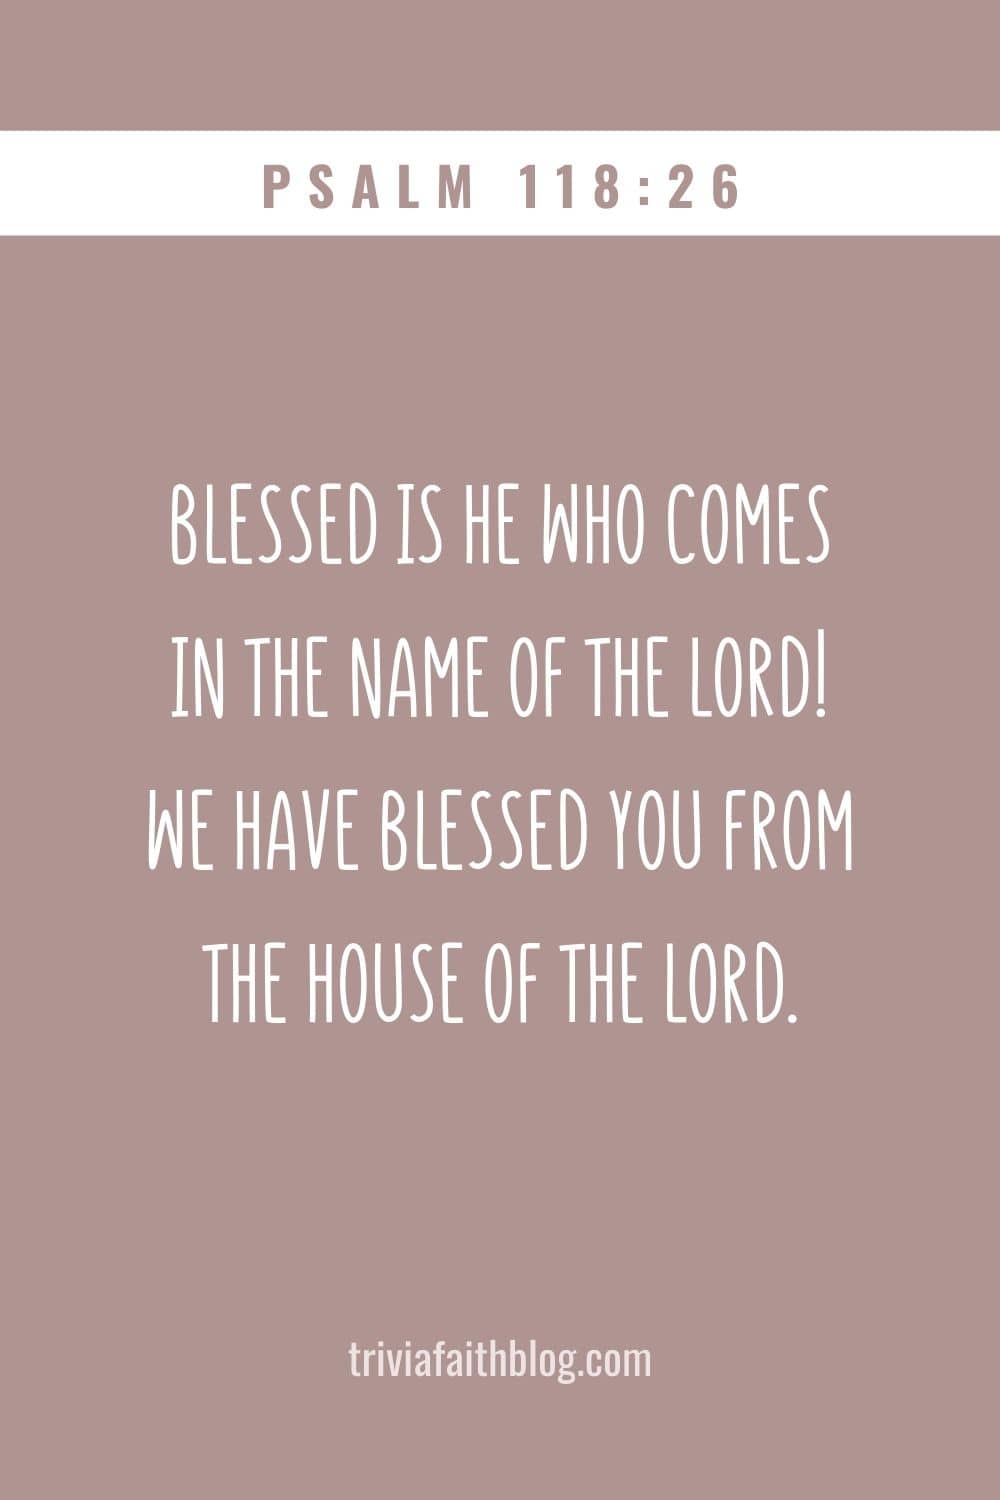 Blessed is he who comes in the name of the LORD